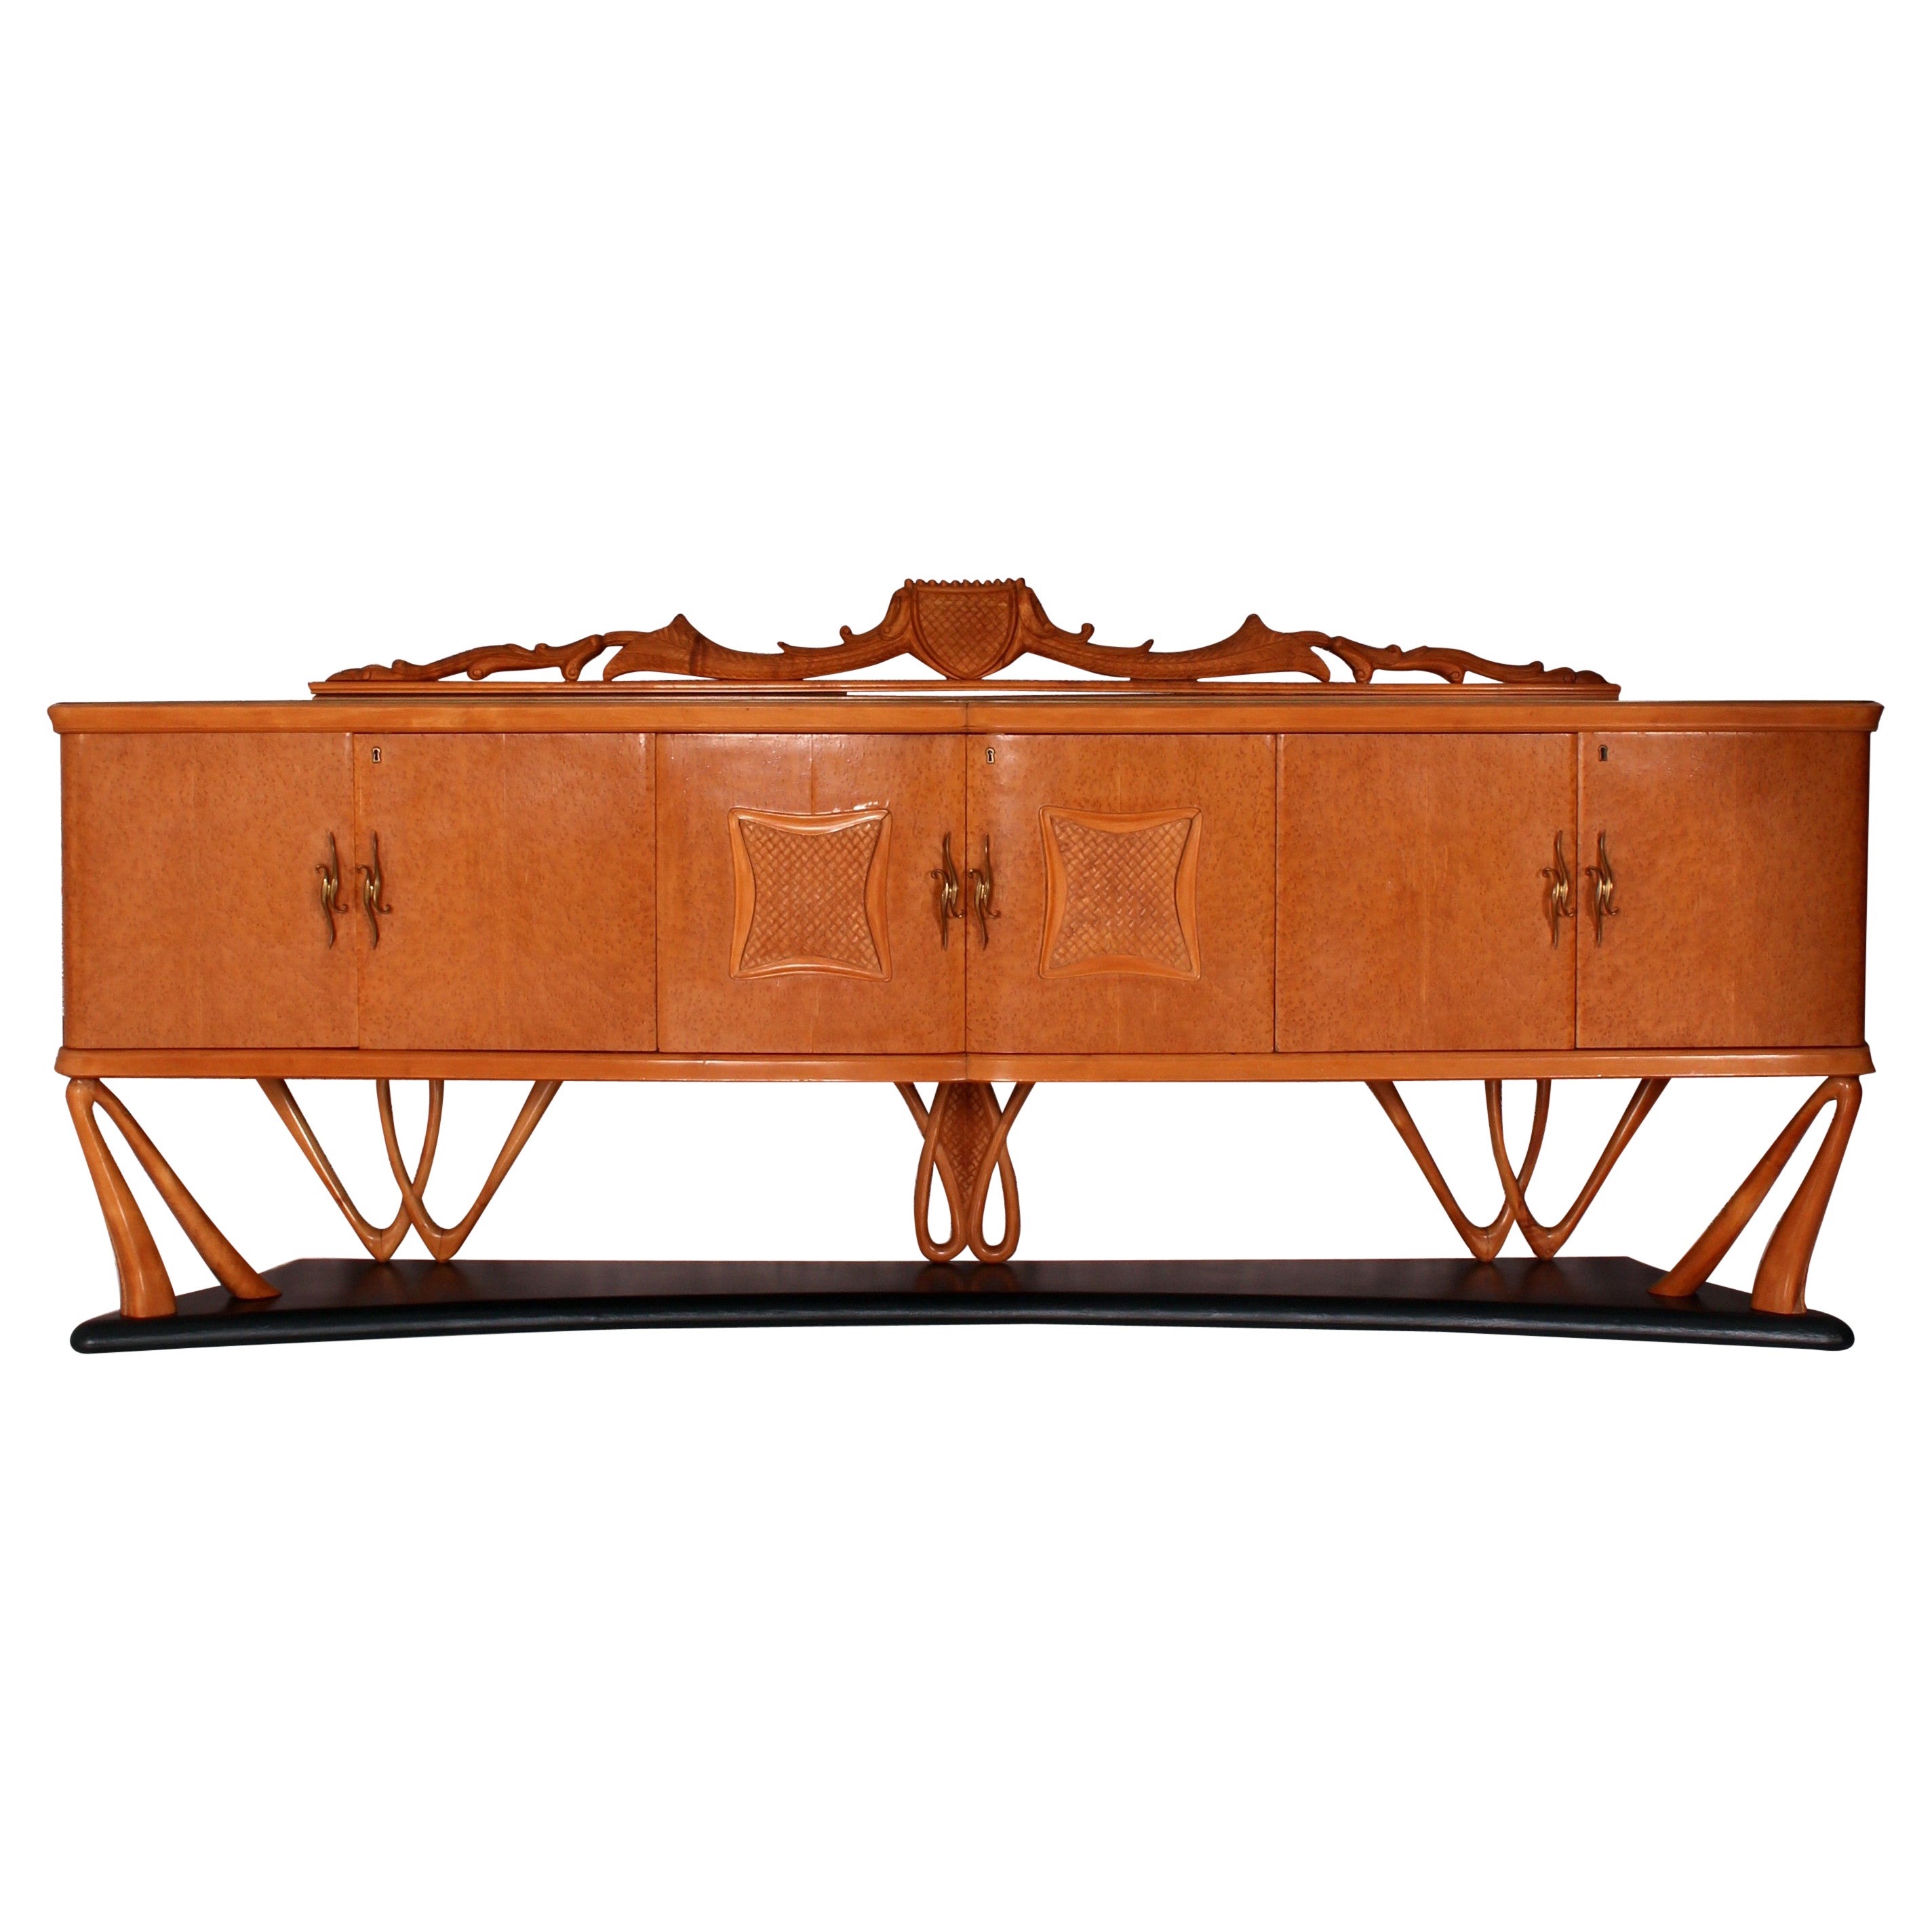 One of a Kind Italian Midcentury Sideboard with Bar Cabinet a. Vittorio Dassi For Sale